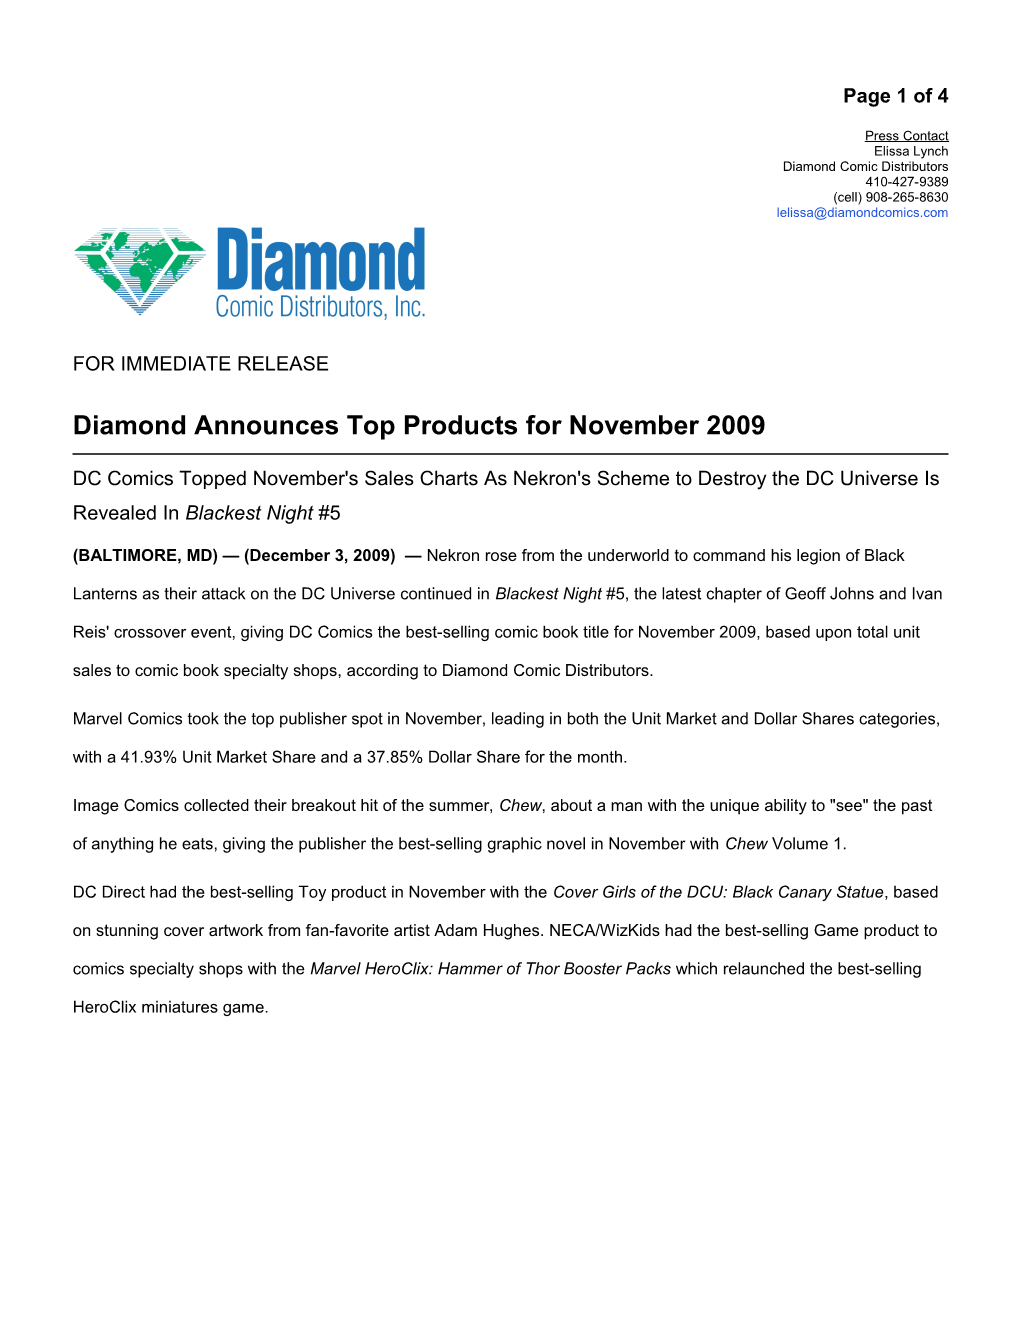 Diamond Announces November 2009 Top Products Page 2 of 4